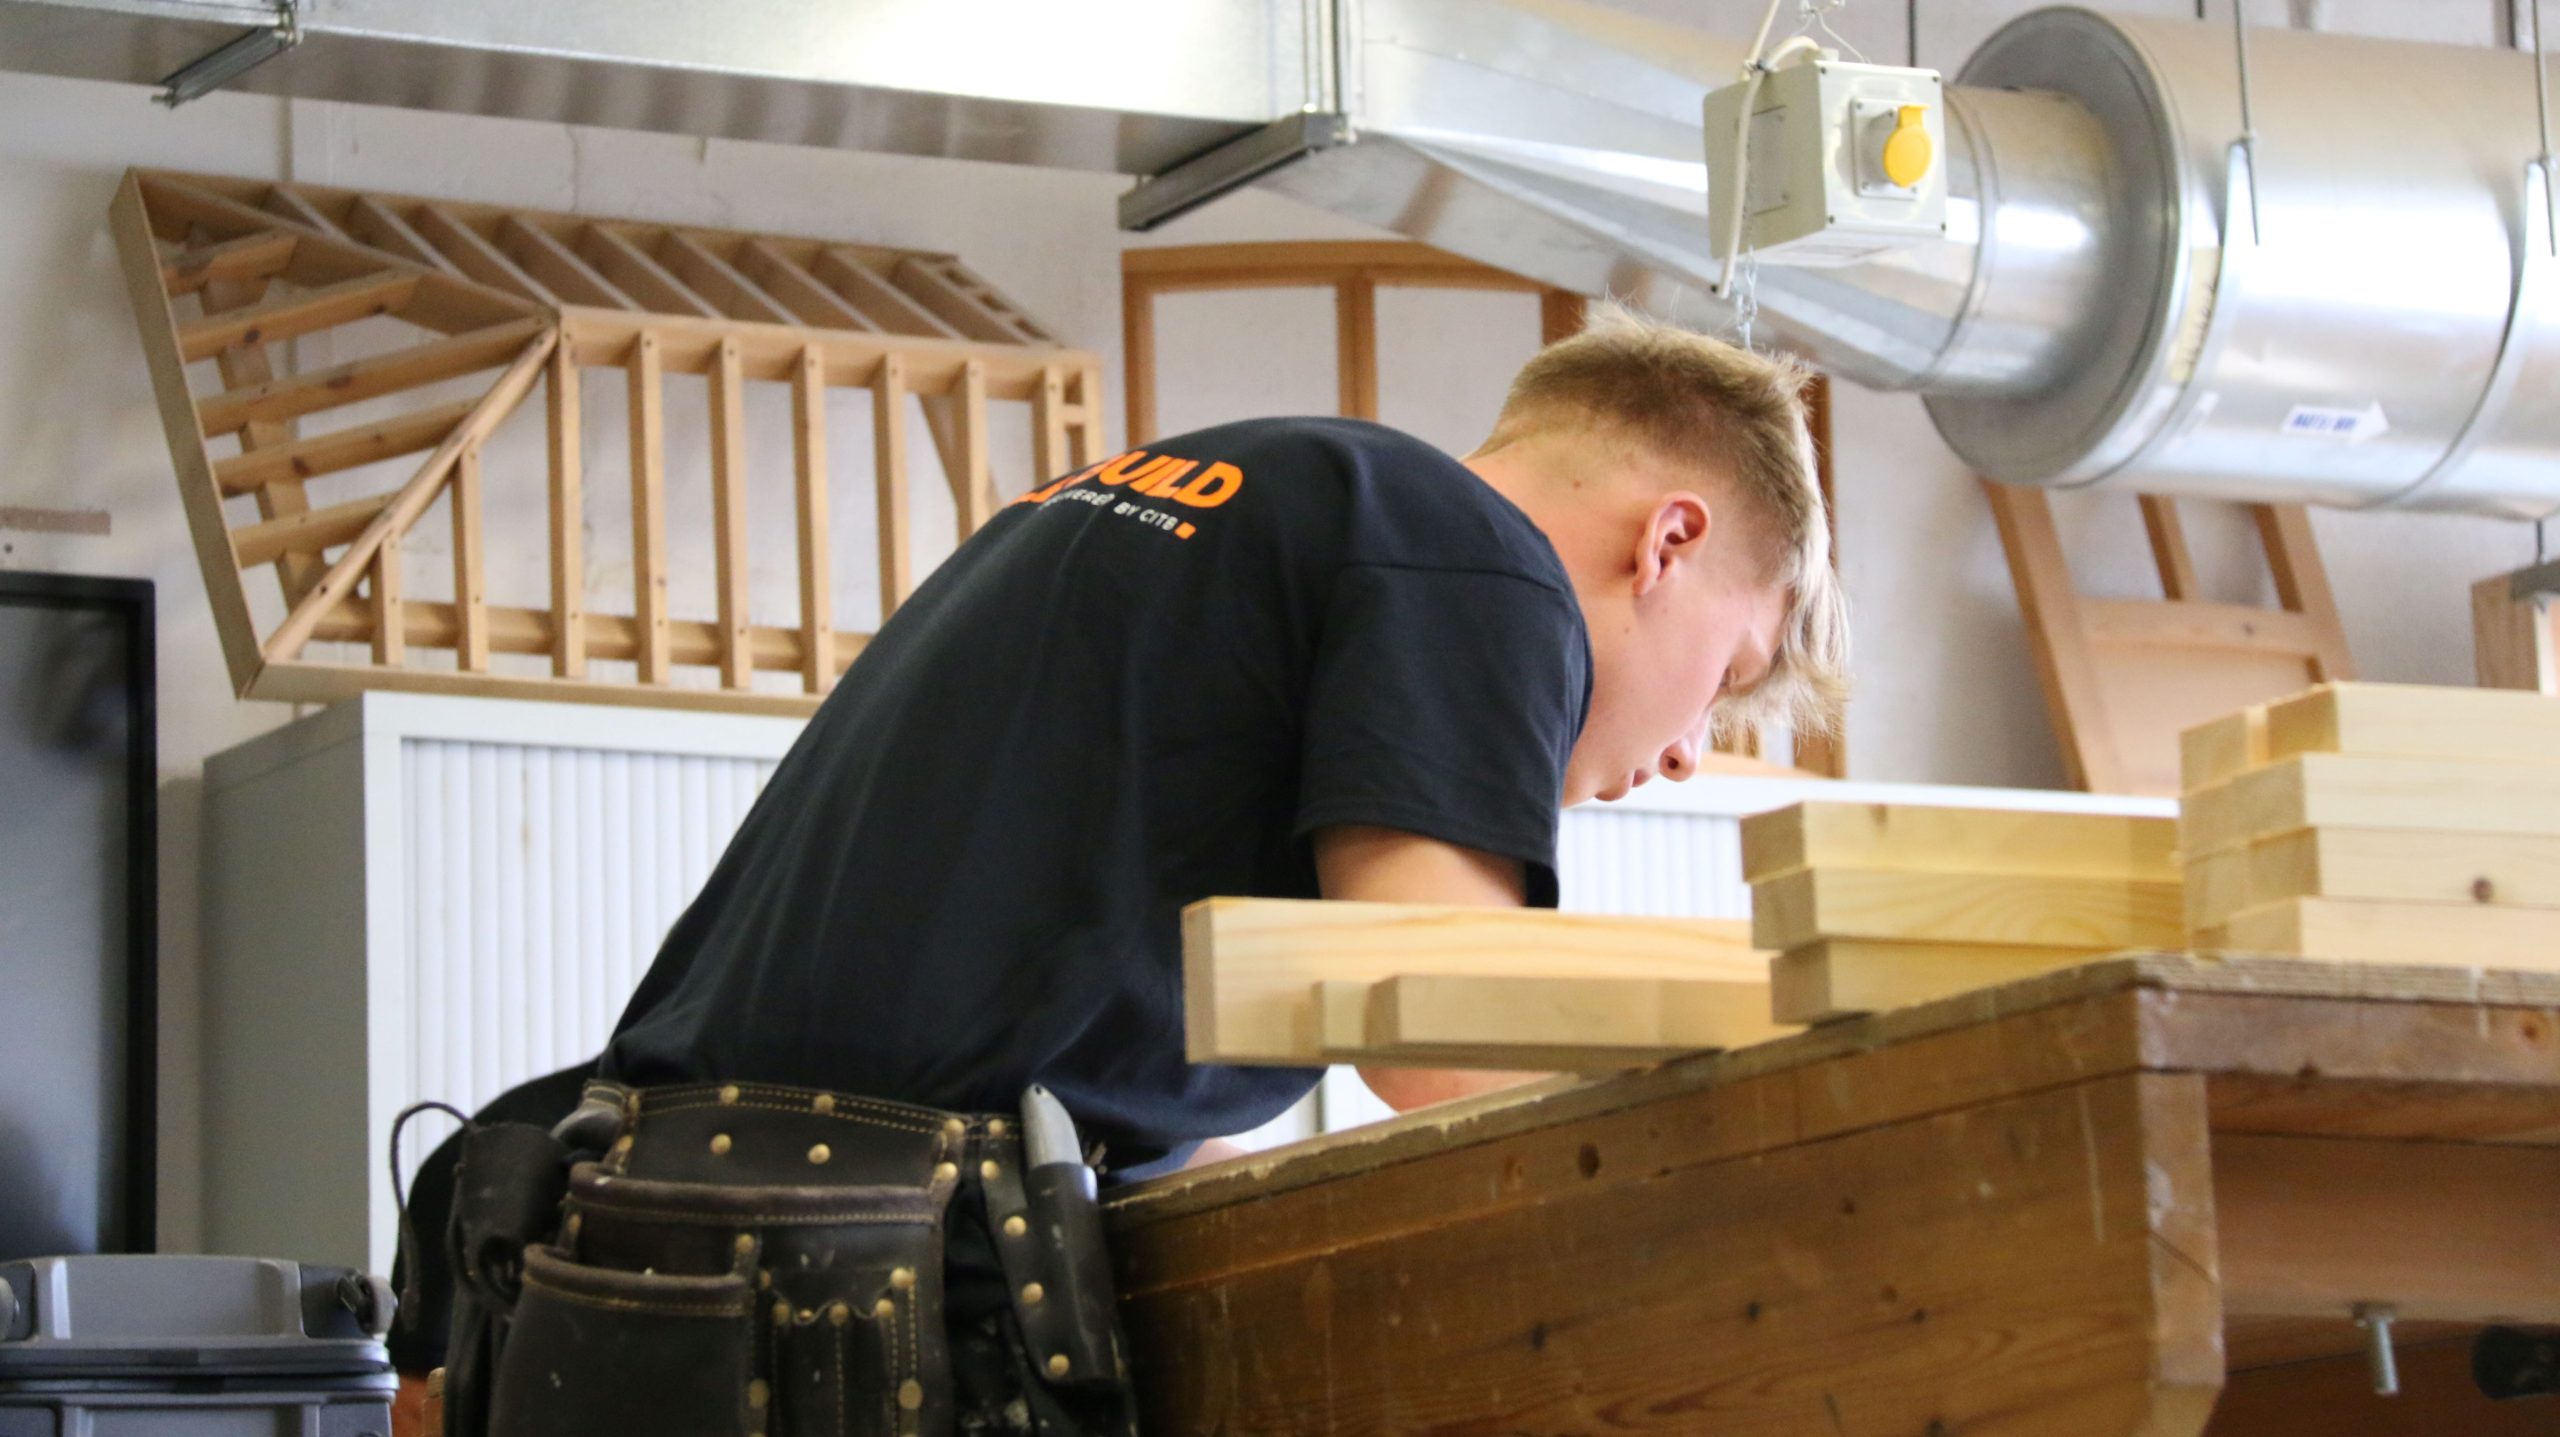 City College Plymouth Hosts the Largest Regional Construction Skills Competition